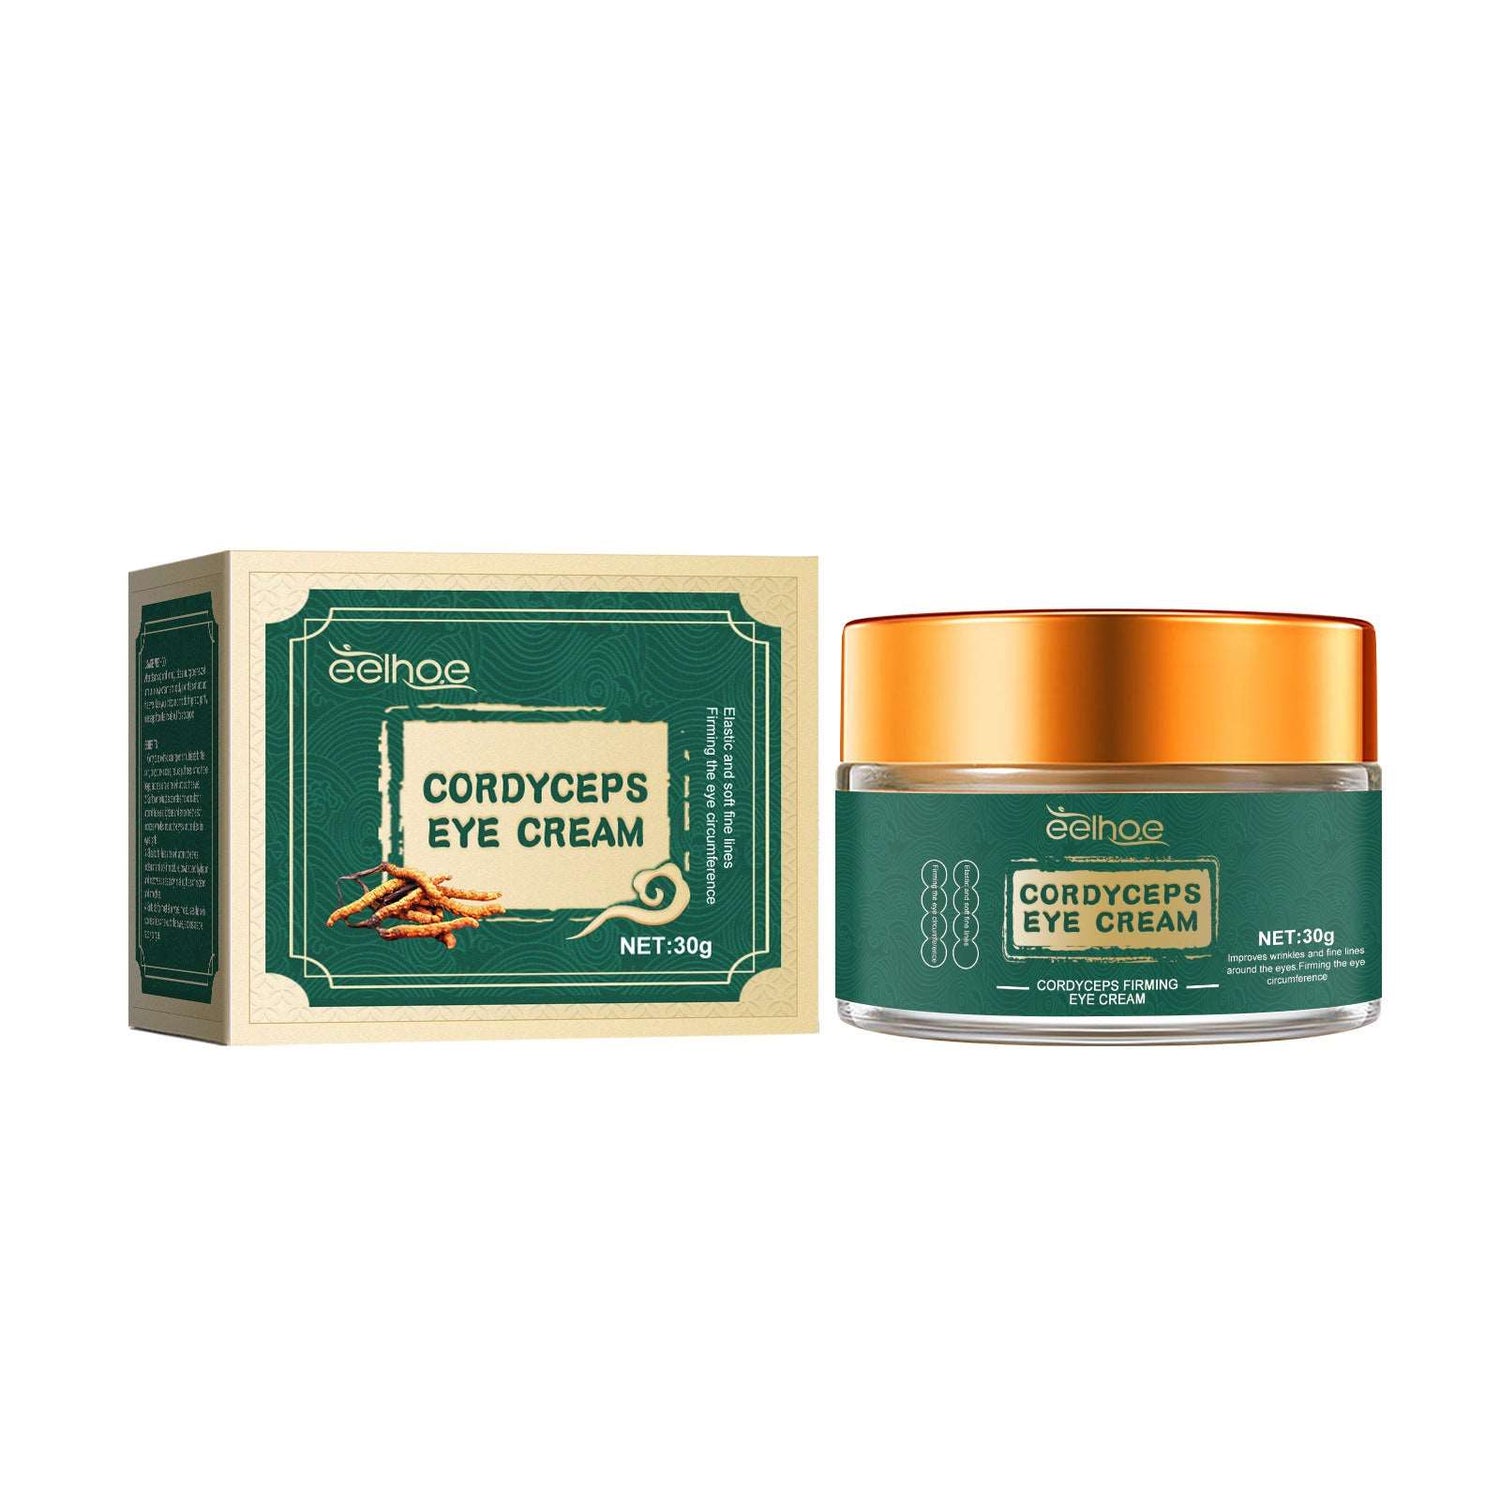 Packaging and jar of Sweet Deals Cordyceps Eye Cream Fade Bags And Dark Circle Fine Lines, featuring a green box with gold elements and an orange jar with product details visible, enriched with Cordyceps Extract.